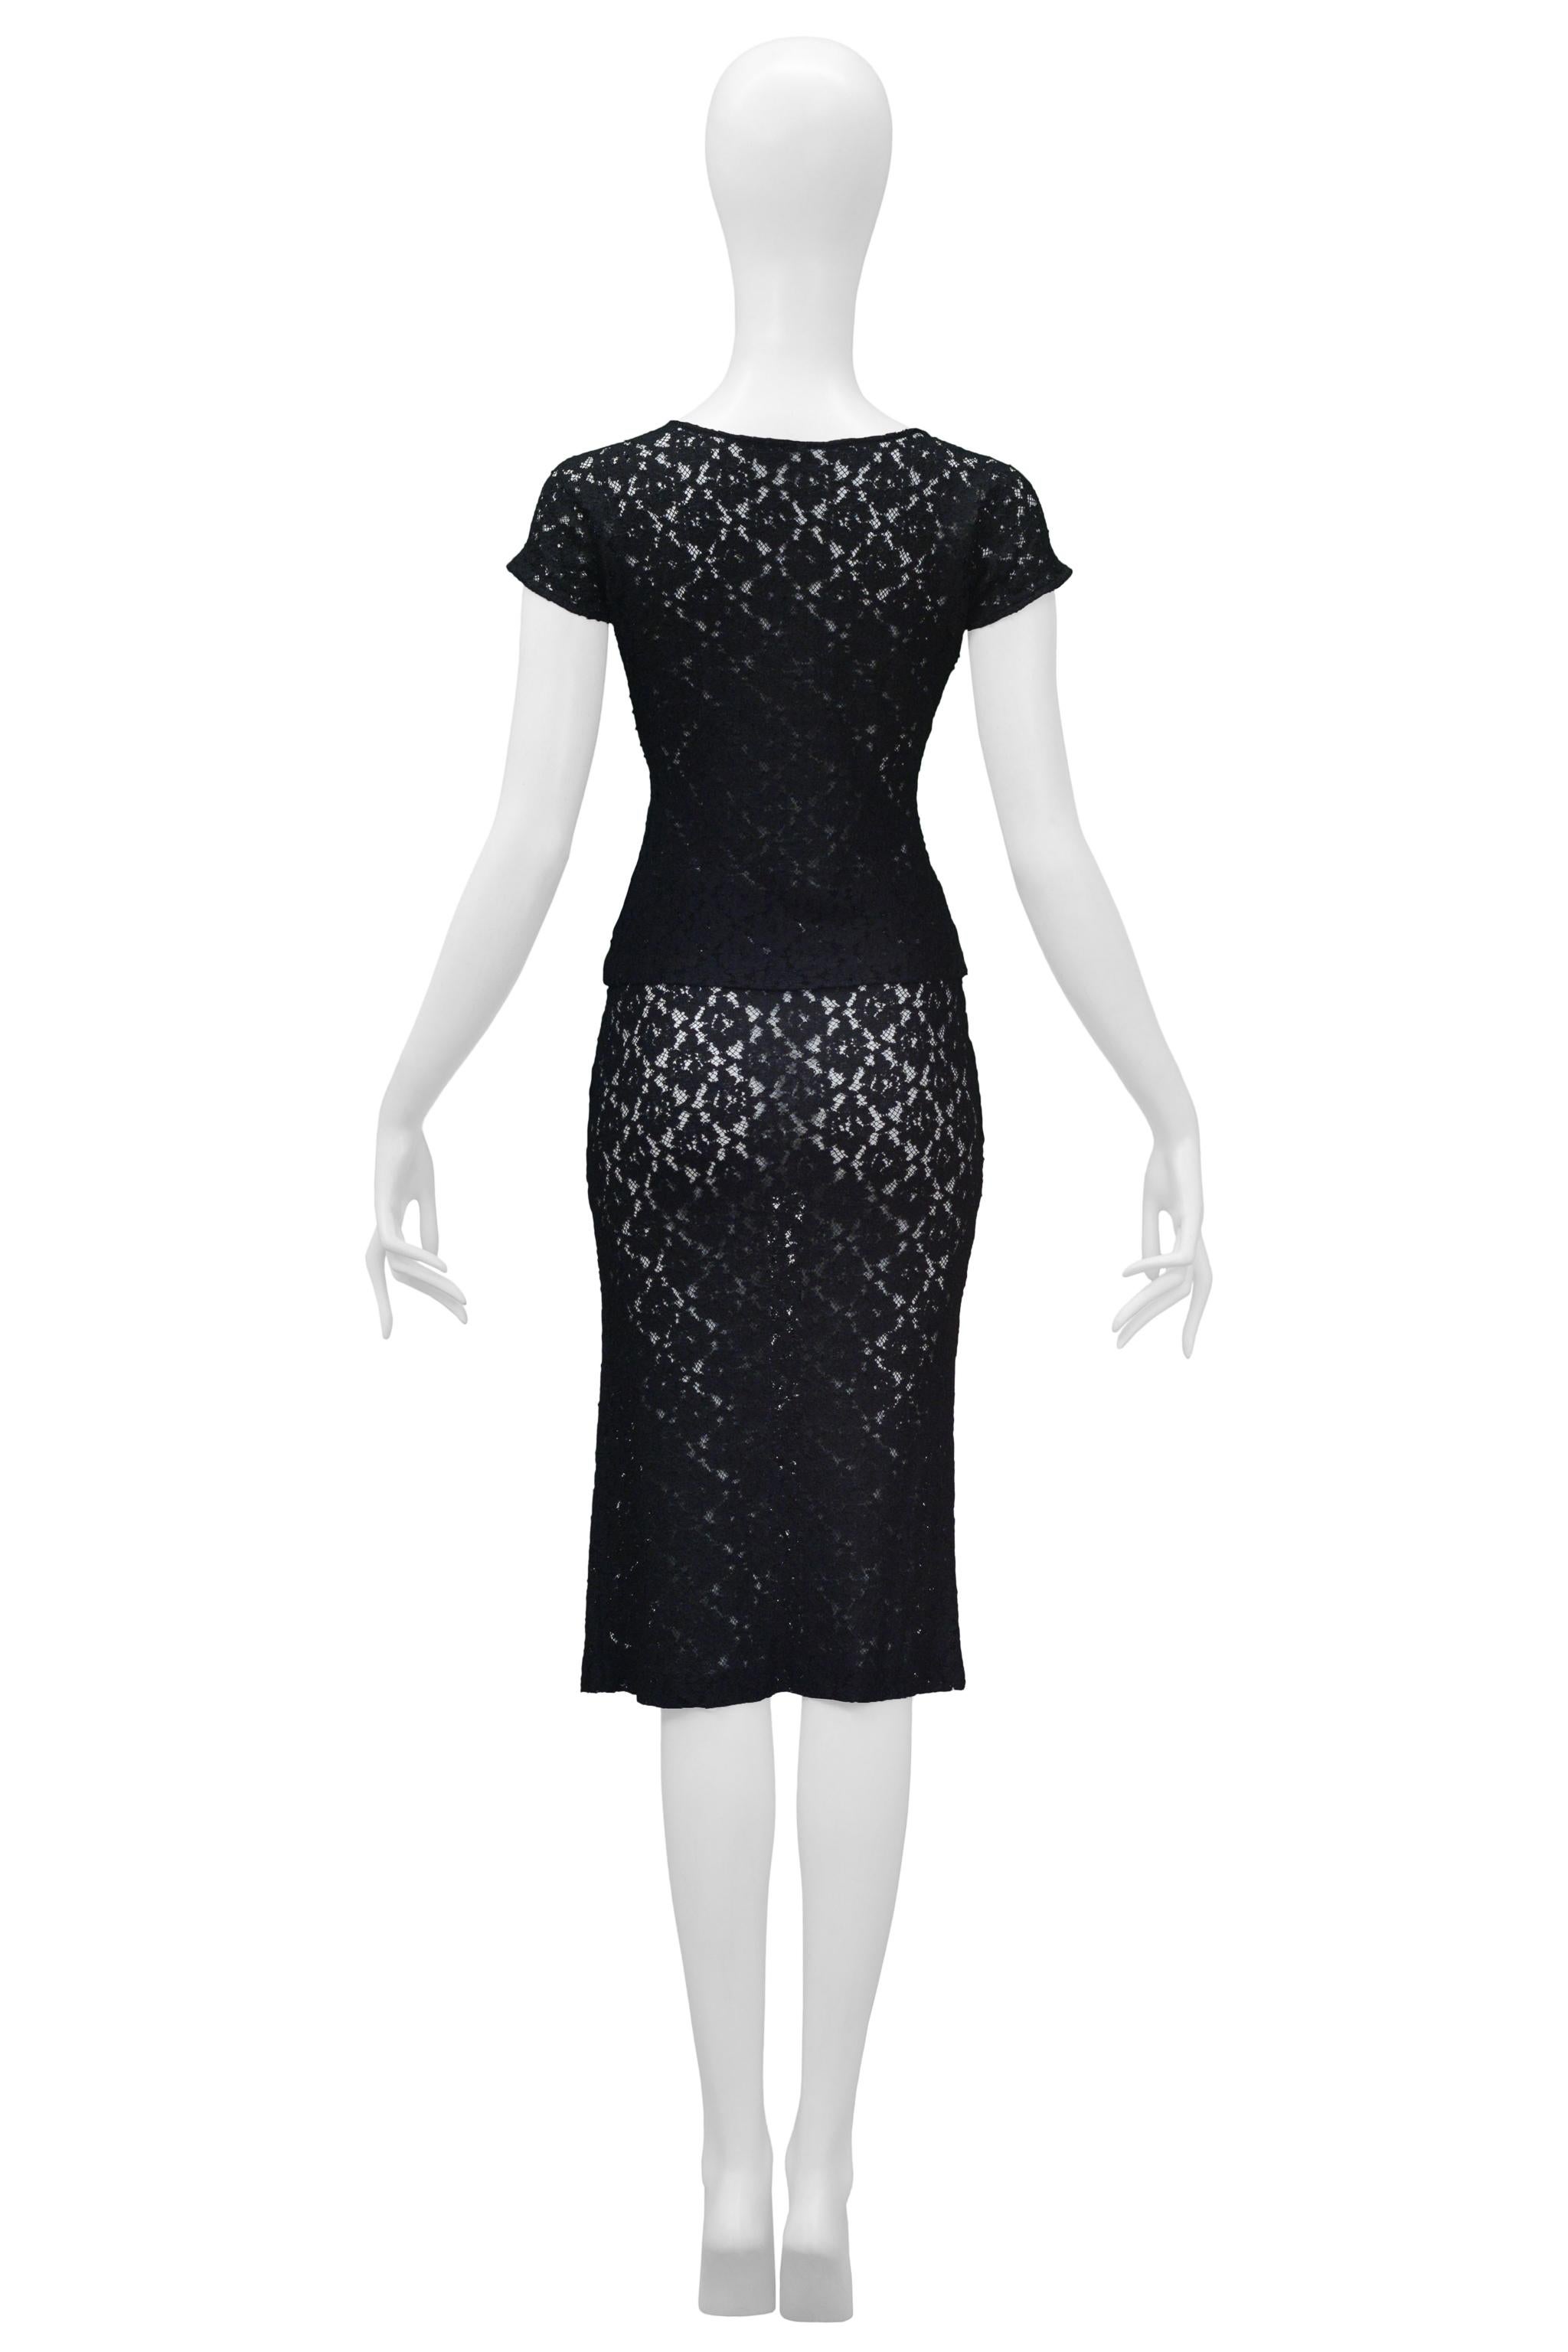 Dolce & Gabbana Black Floral Lace Top And Skirt Ensemble 1990s In Excellent Condition For Sale In Los Angeles, CA